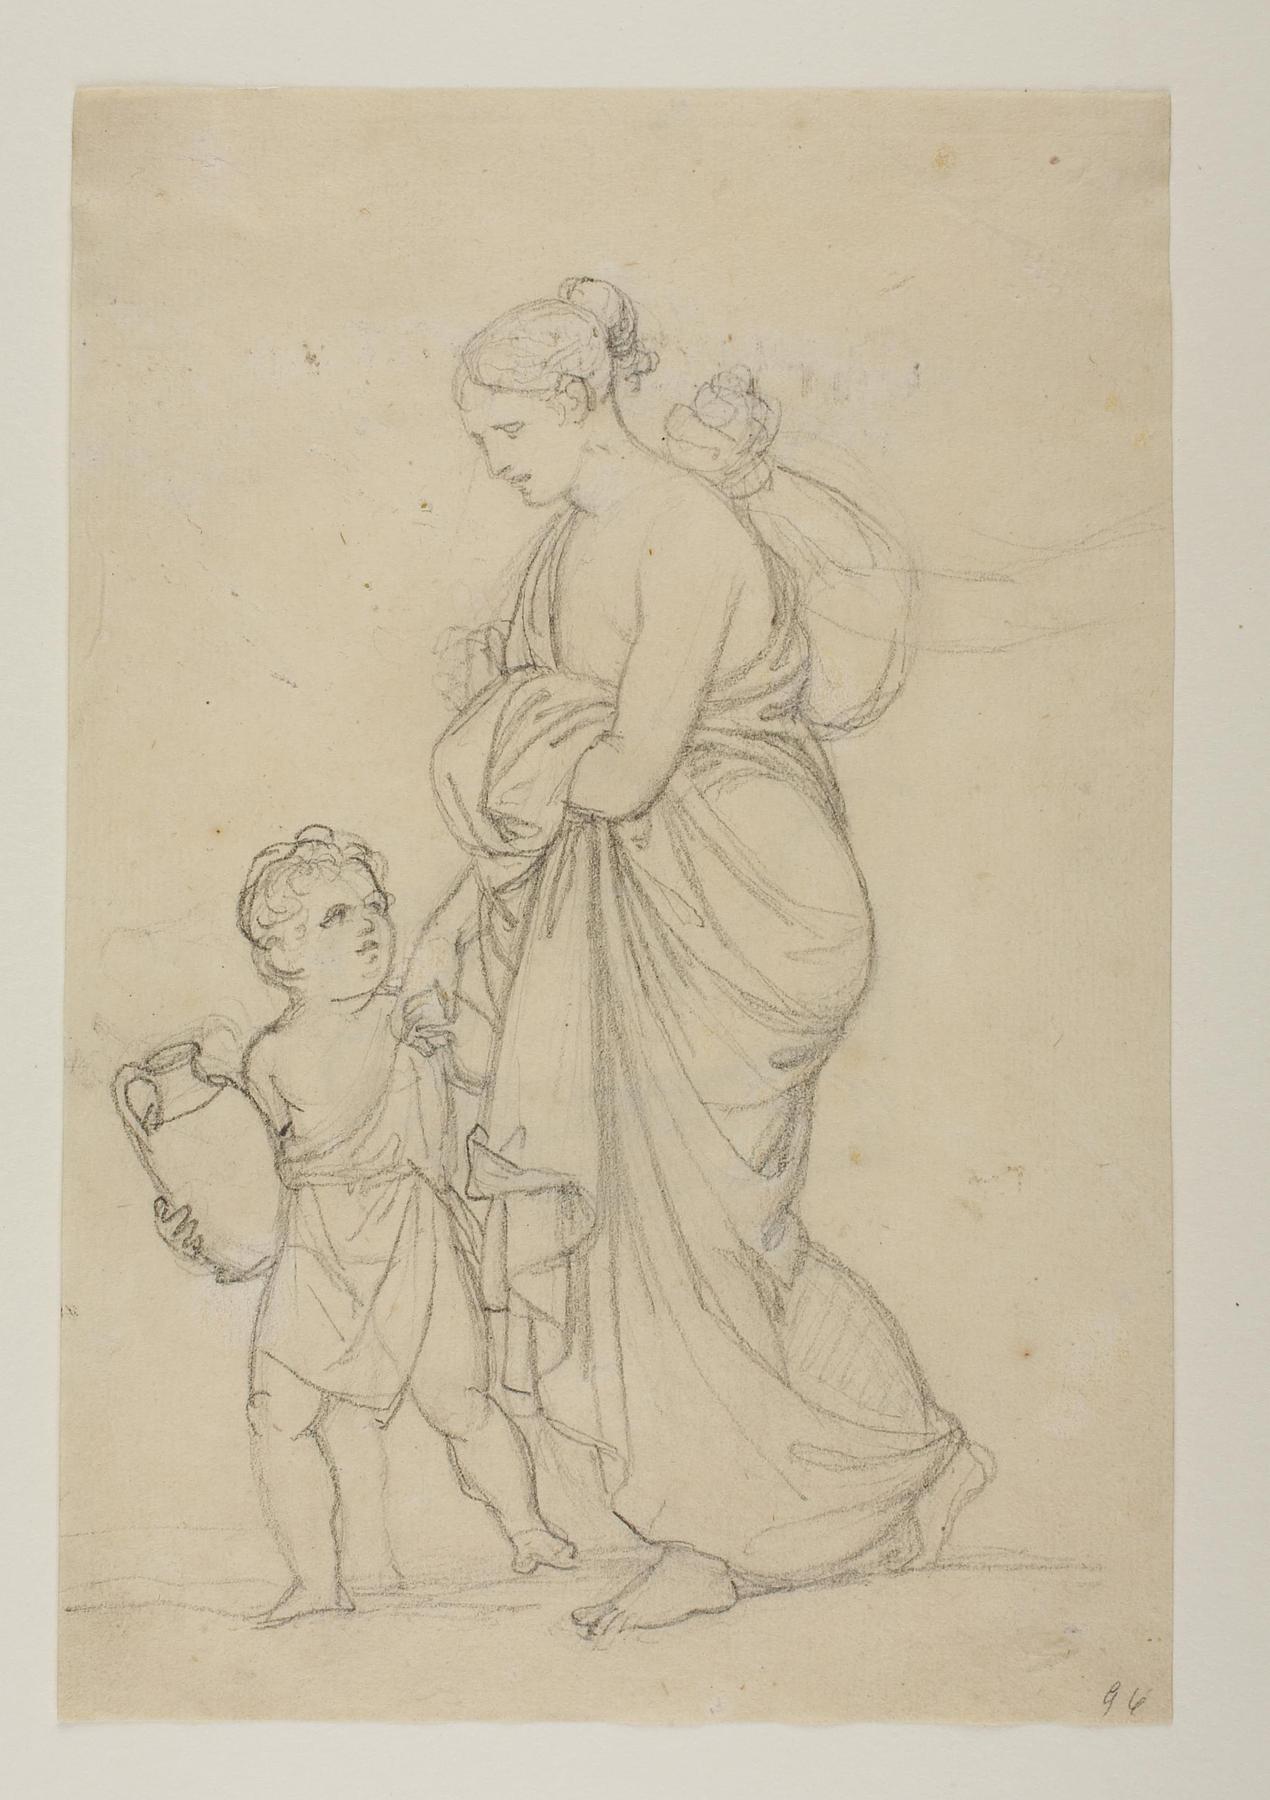 Woman walking with a child who is carrying a jug of water (Hagar and Ishmael?), C96r